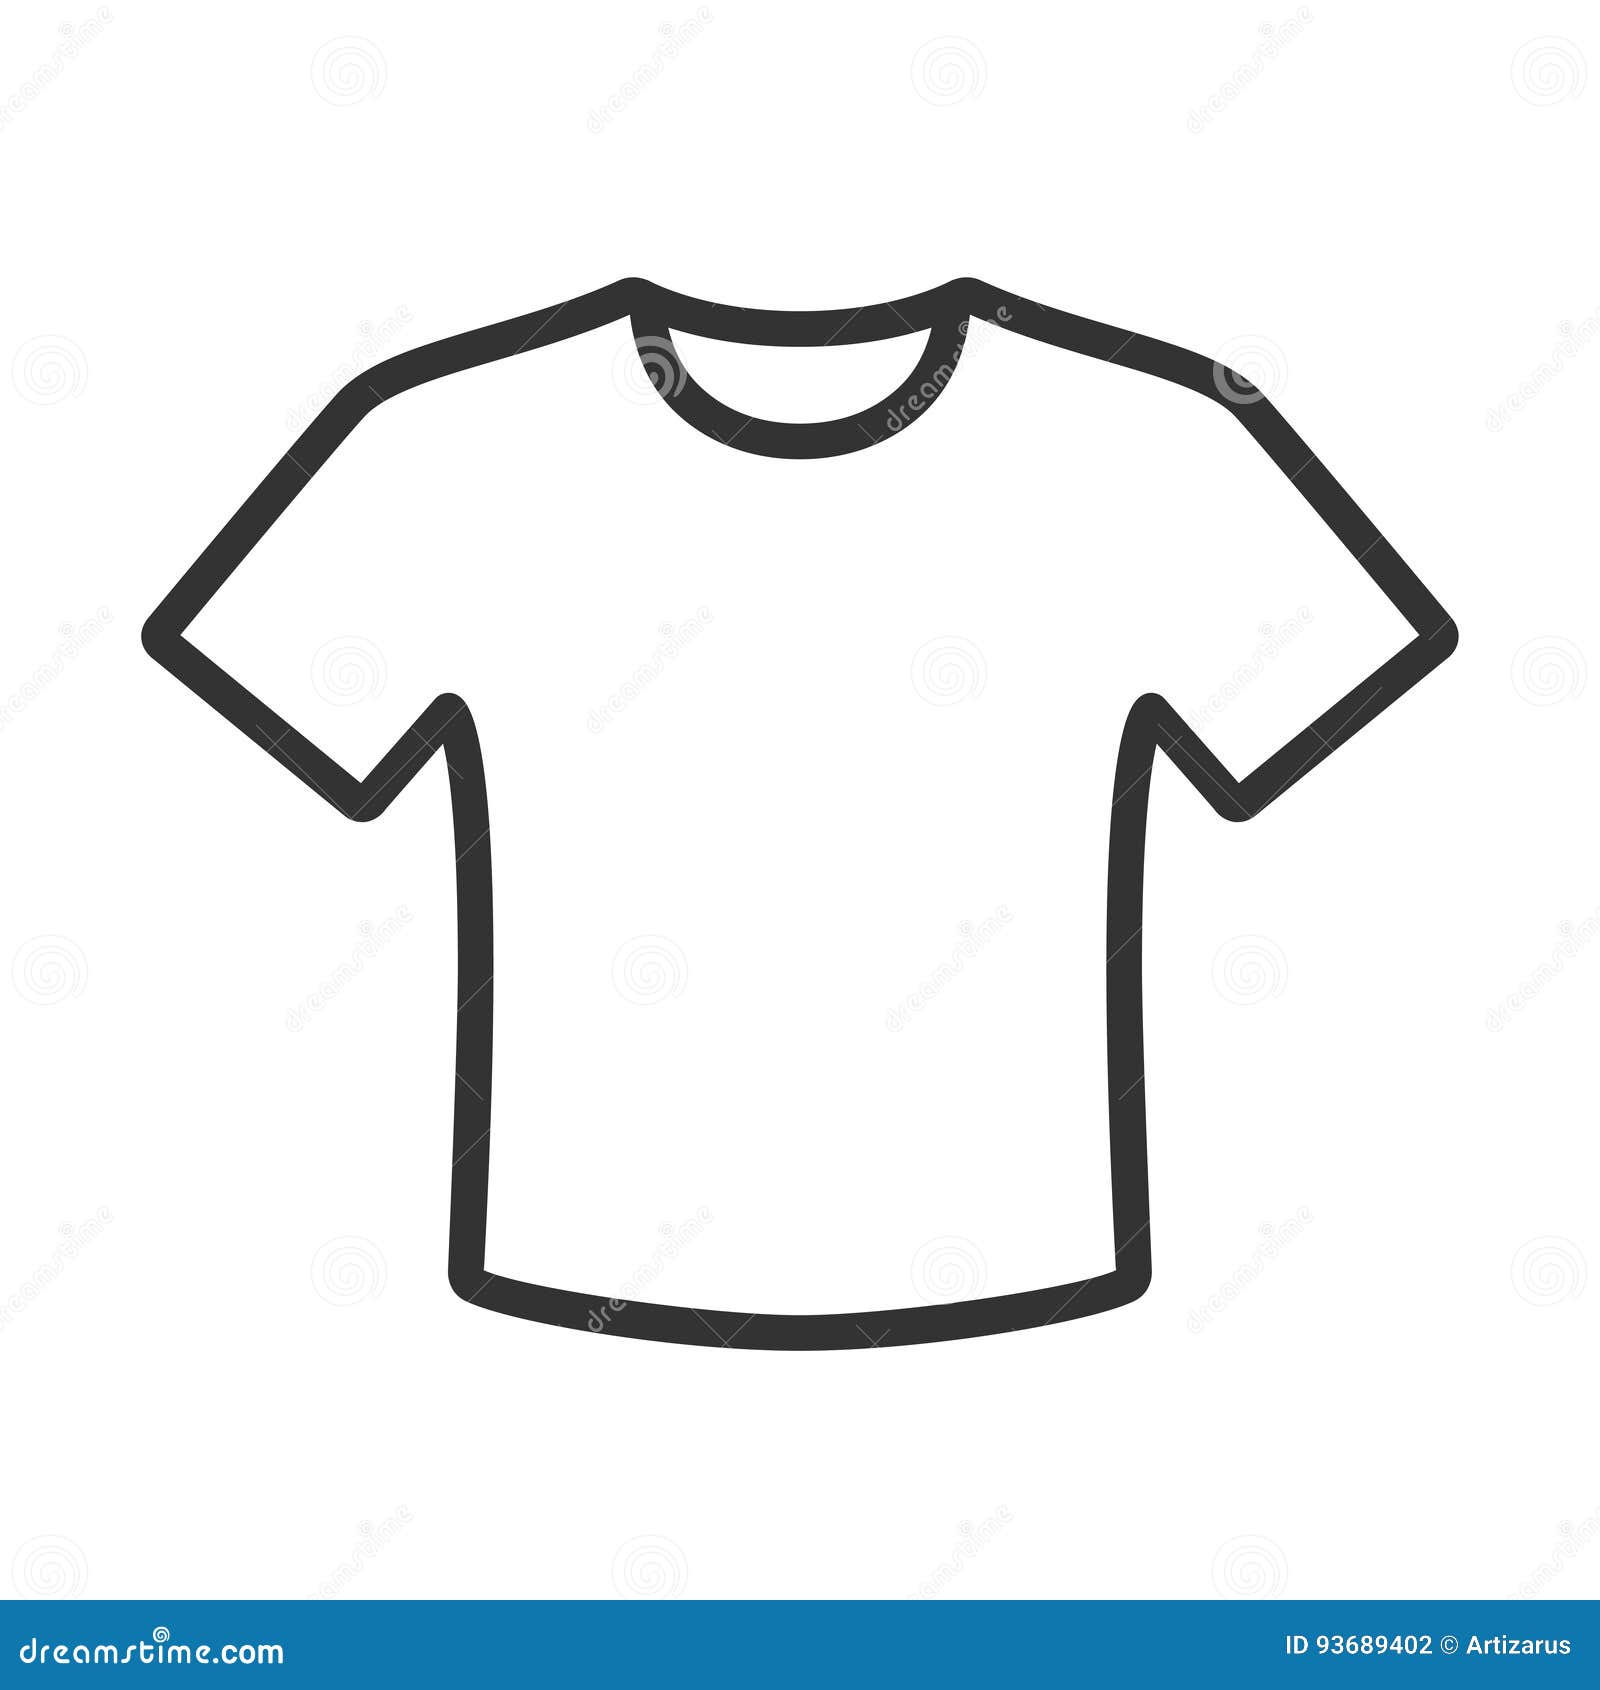 Shirt Pocket Vector Art, Icons, and Graphics for Free Download